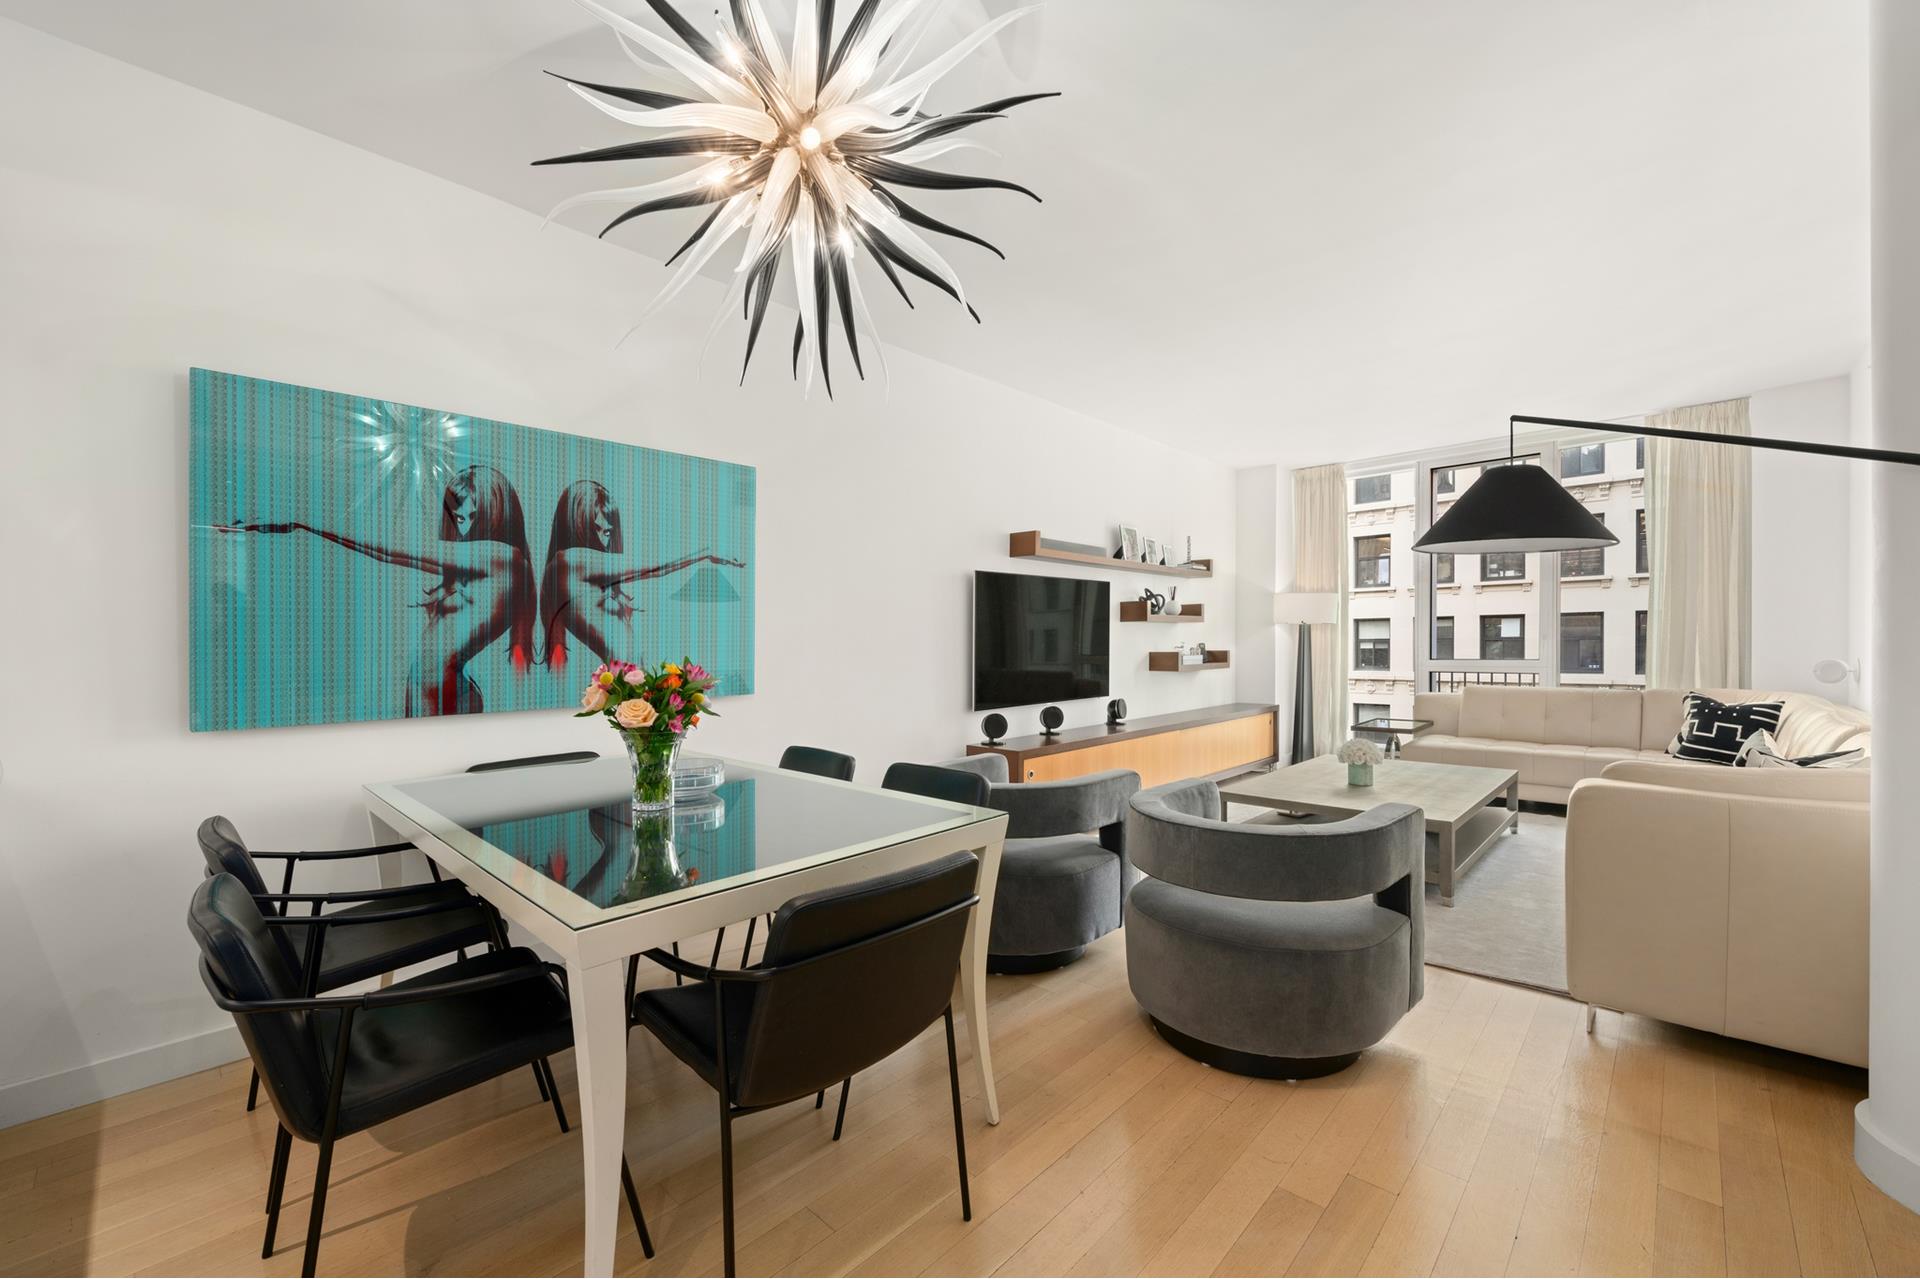 241 5th Avenue 8B, Nomad, Downtown, NYC - 3 Bedrooms  
3.5 Bathrooms  
6 Rooms - 